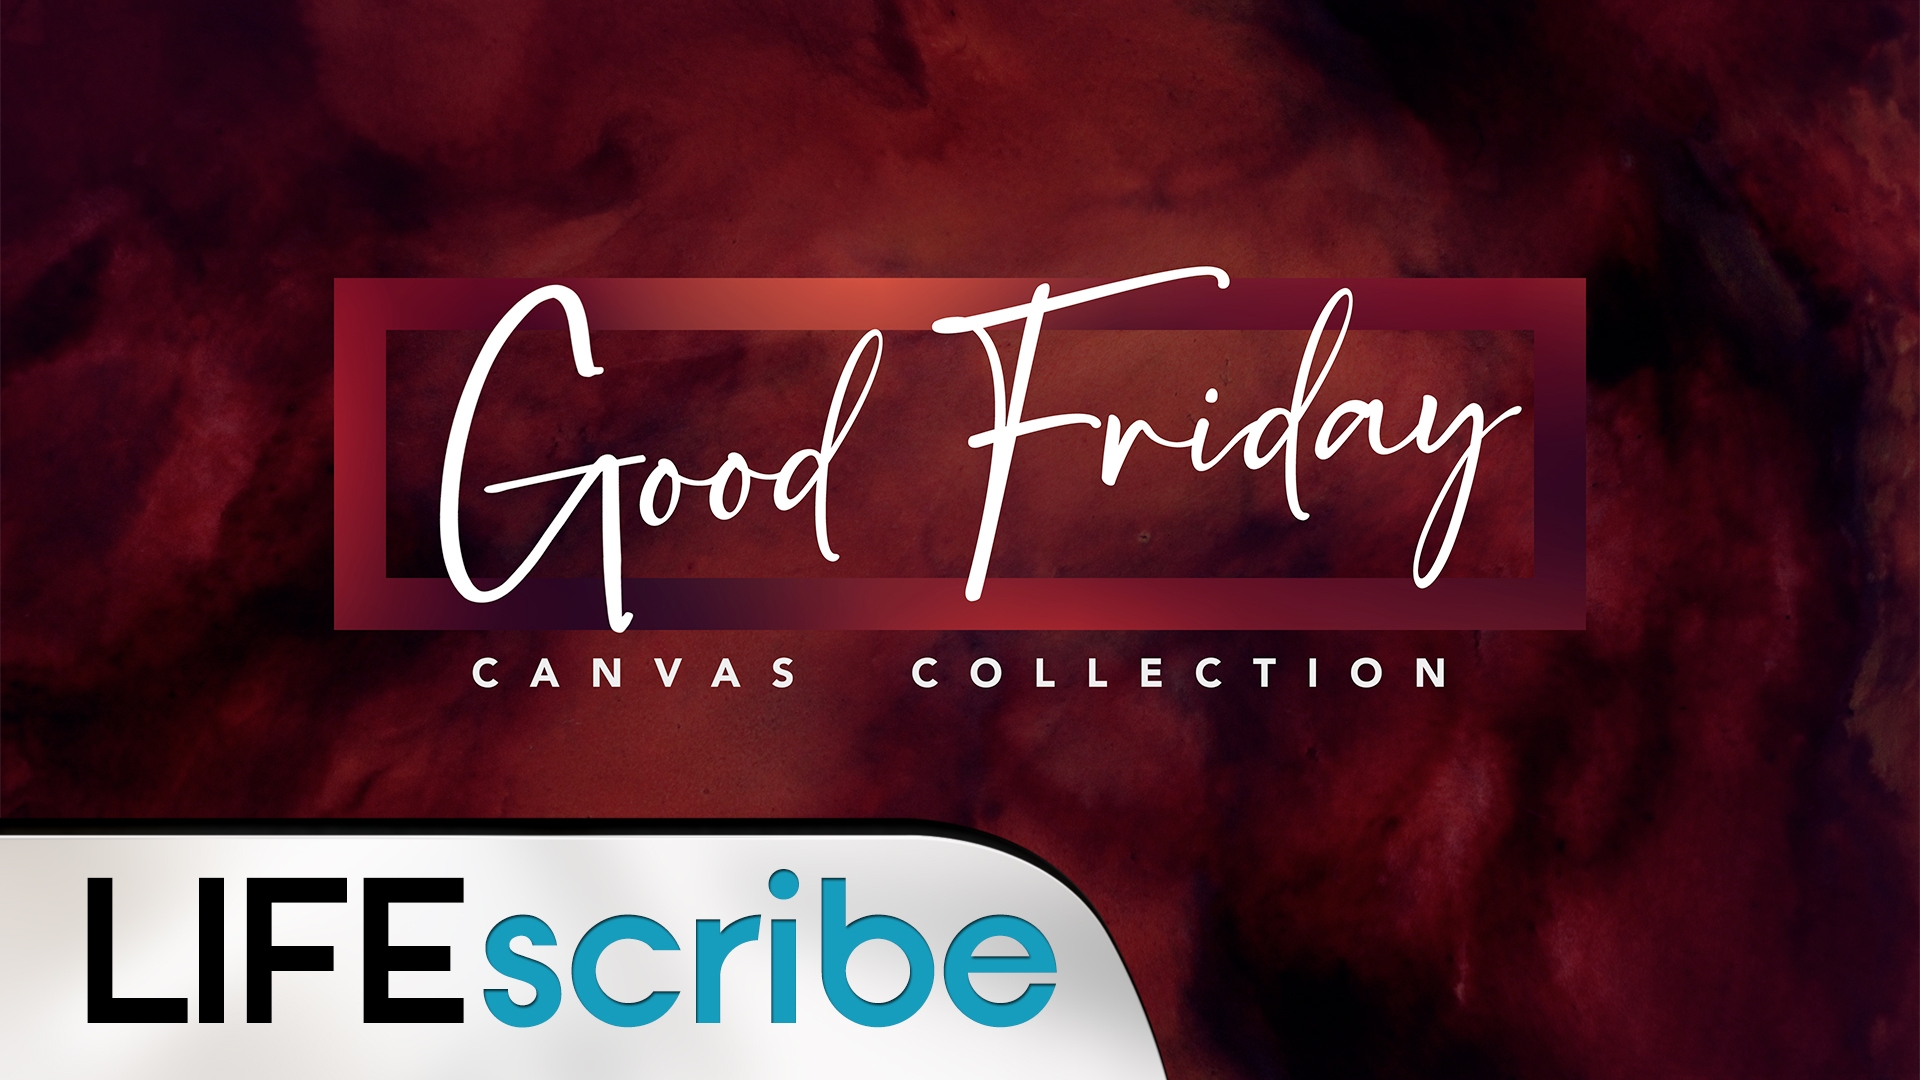 Good Friday Canvas Collection